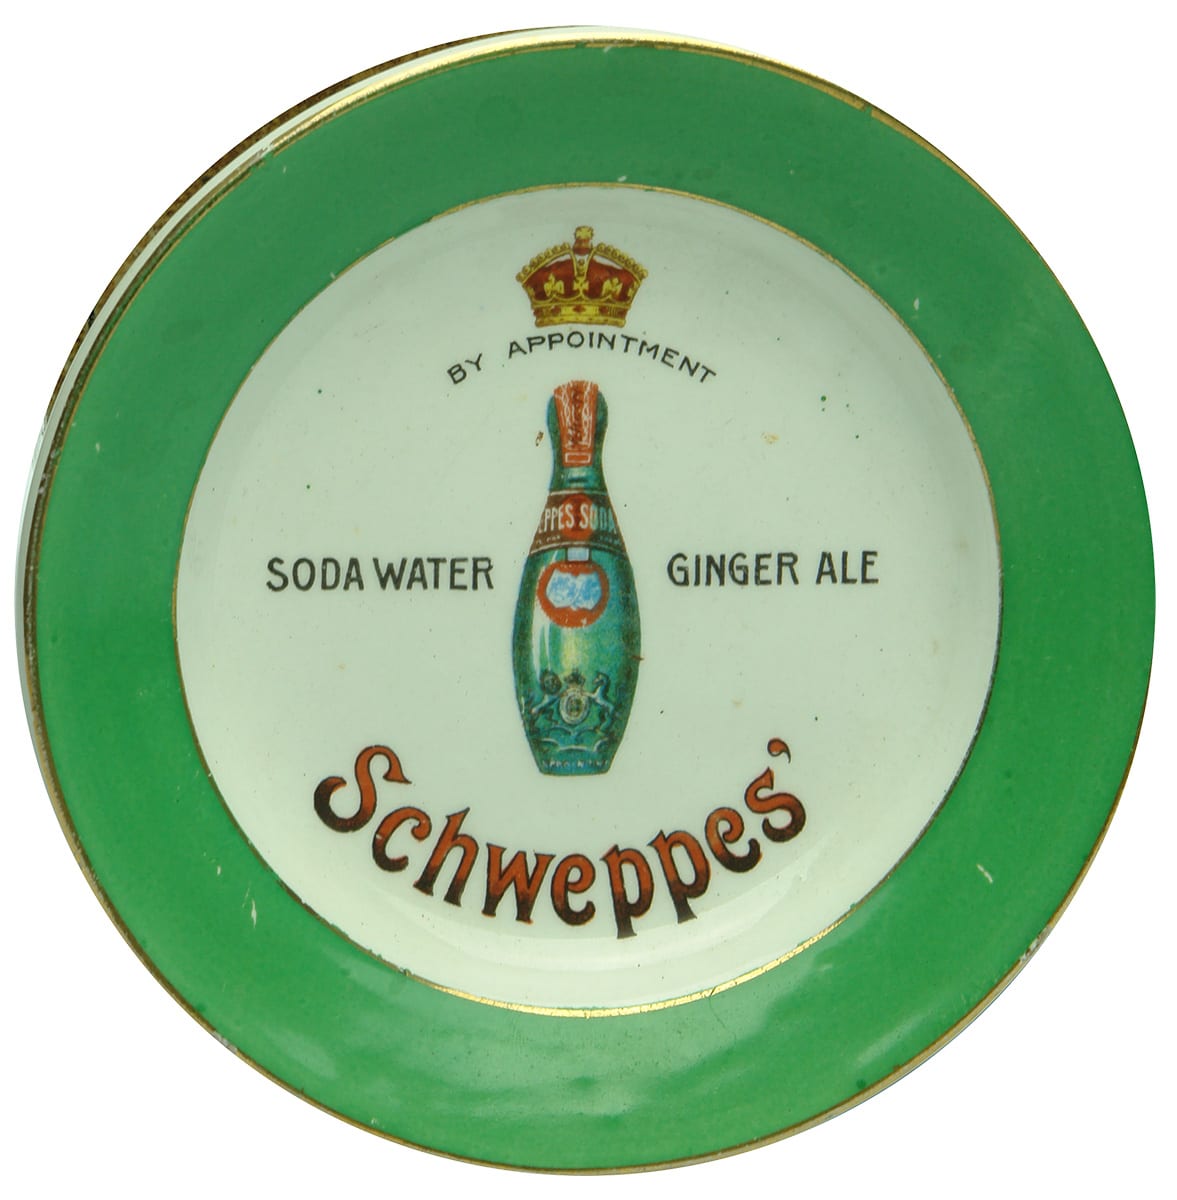 Schweppes Soda Water Ginger Ale Advertising Dish